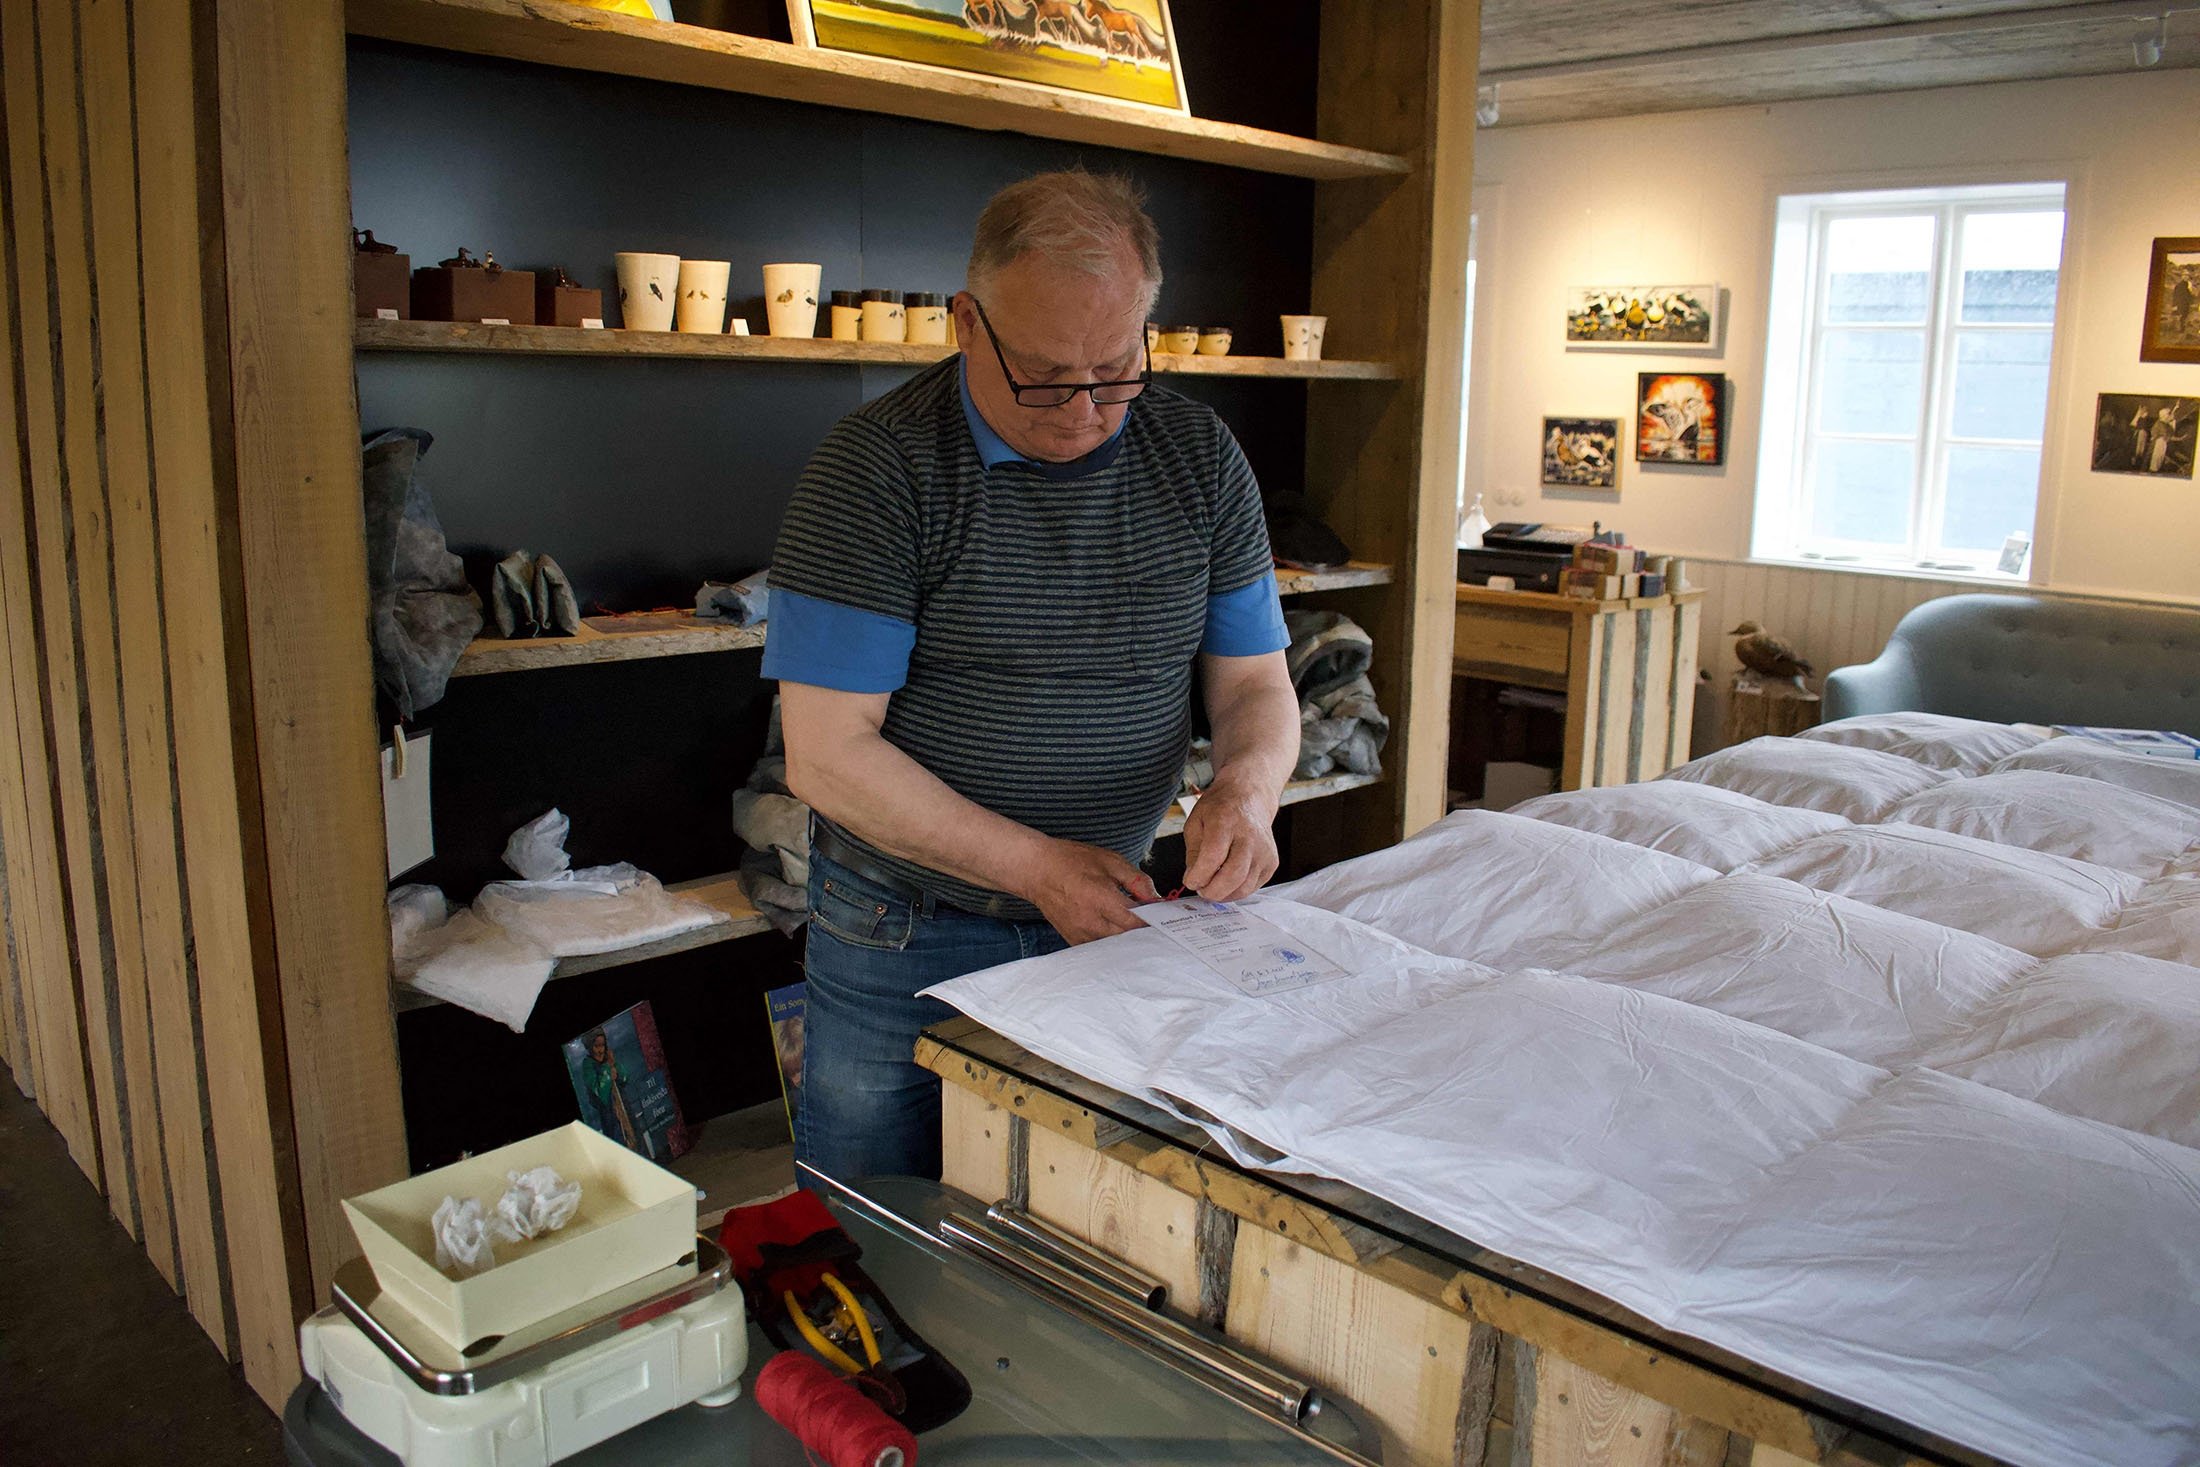 Quality inspector Asgeir Jonsson puts a quality certificate on a recently made eiderdown duvet at the King Eider company in Stykkisholmur, Iceland, July 5, 2021. (AFP Photo)